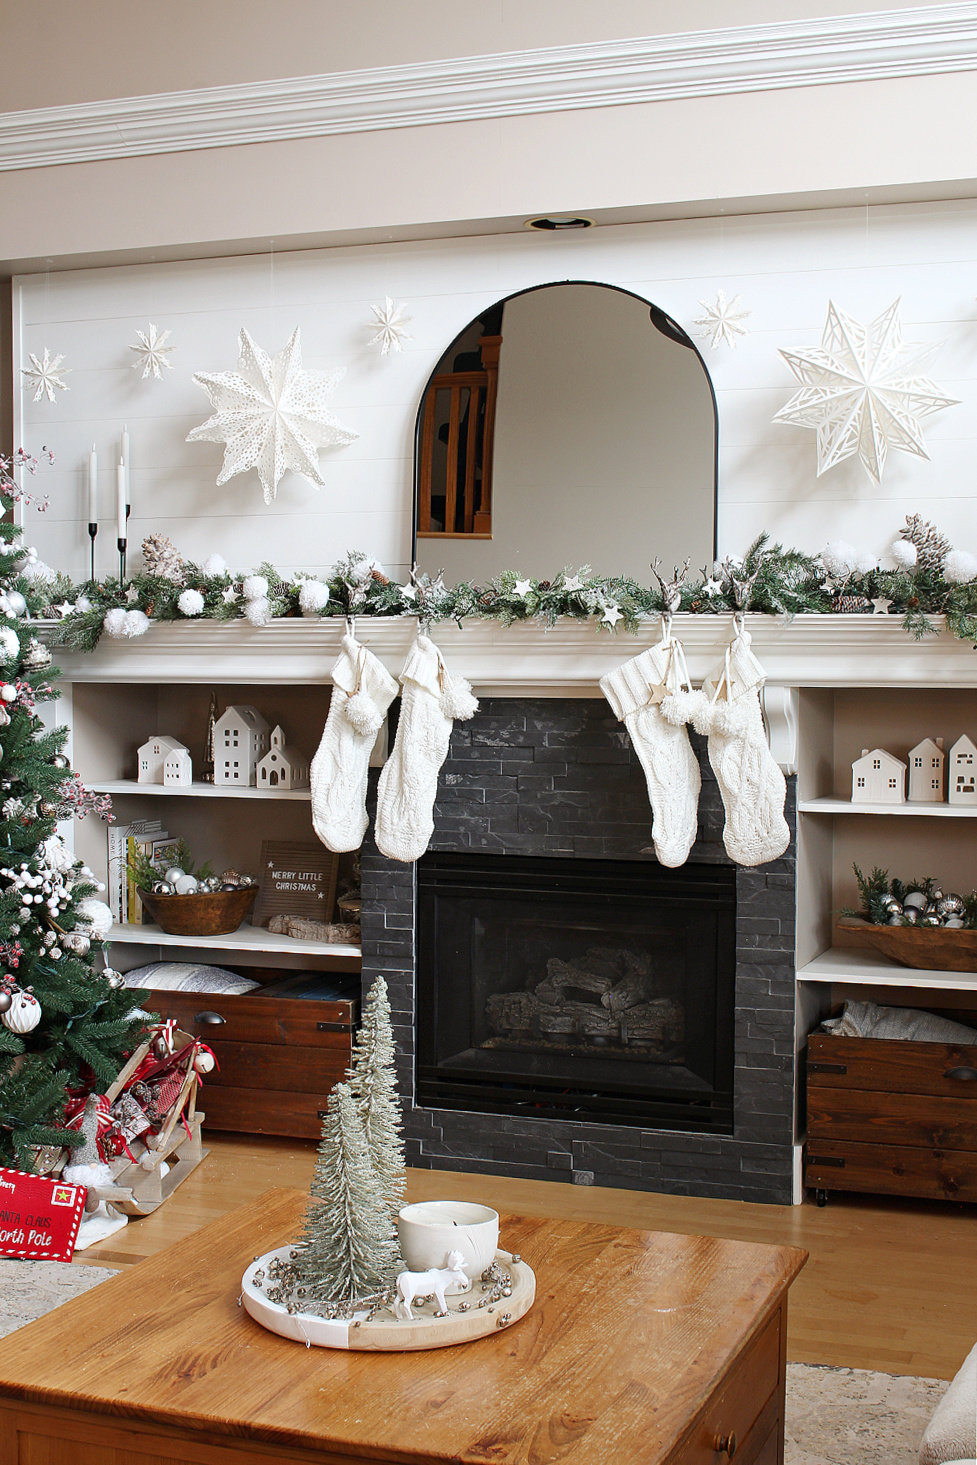 Winter wonderland Christmas mantel with black arched mirror.